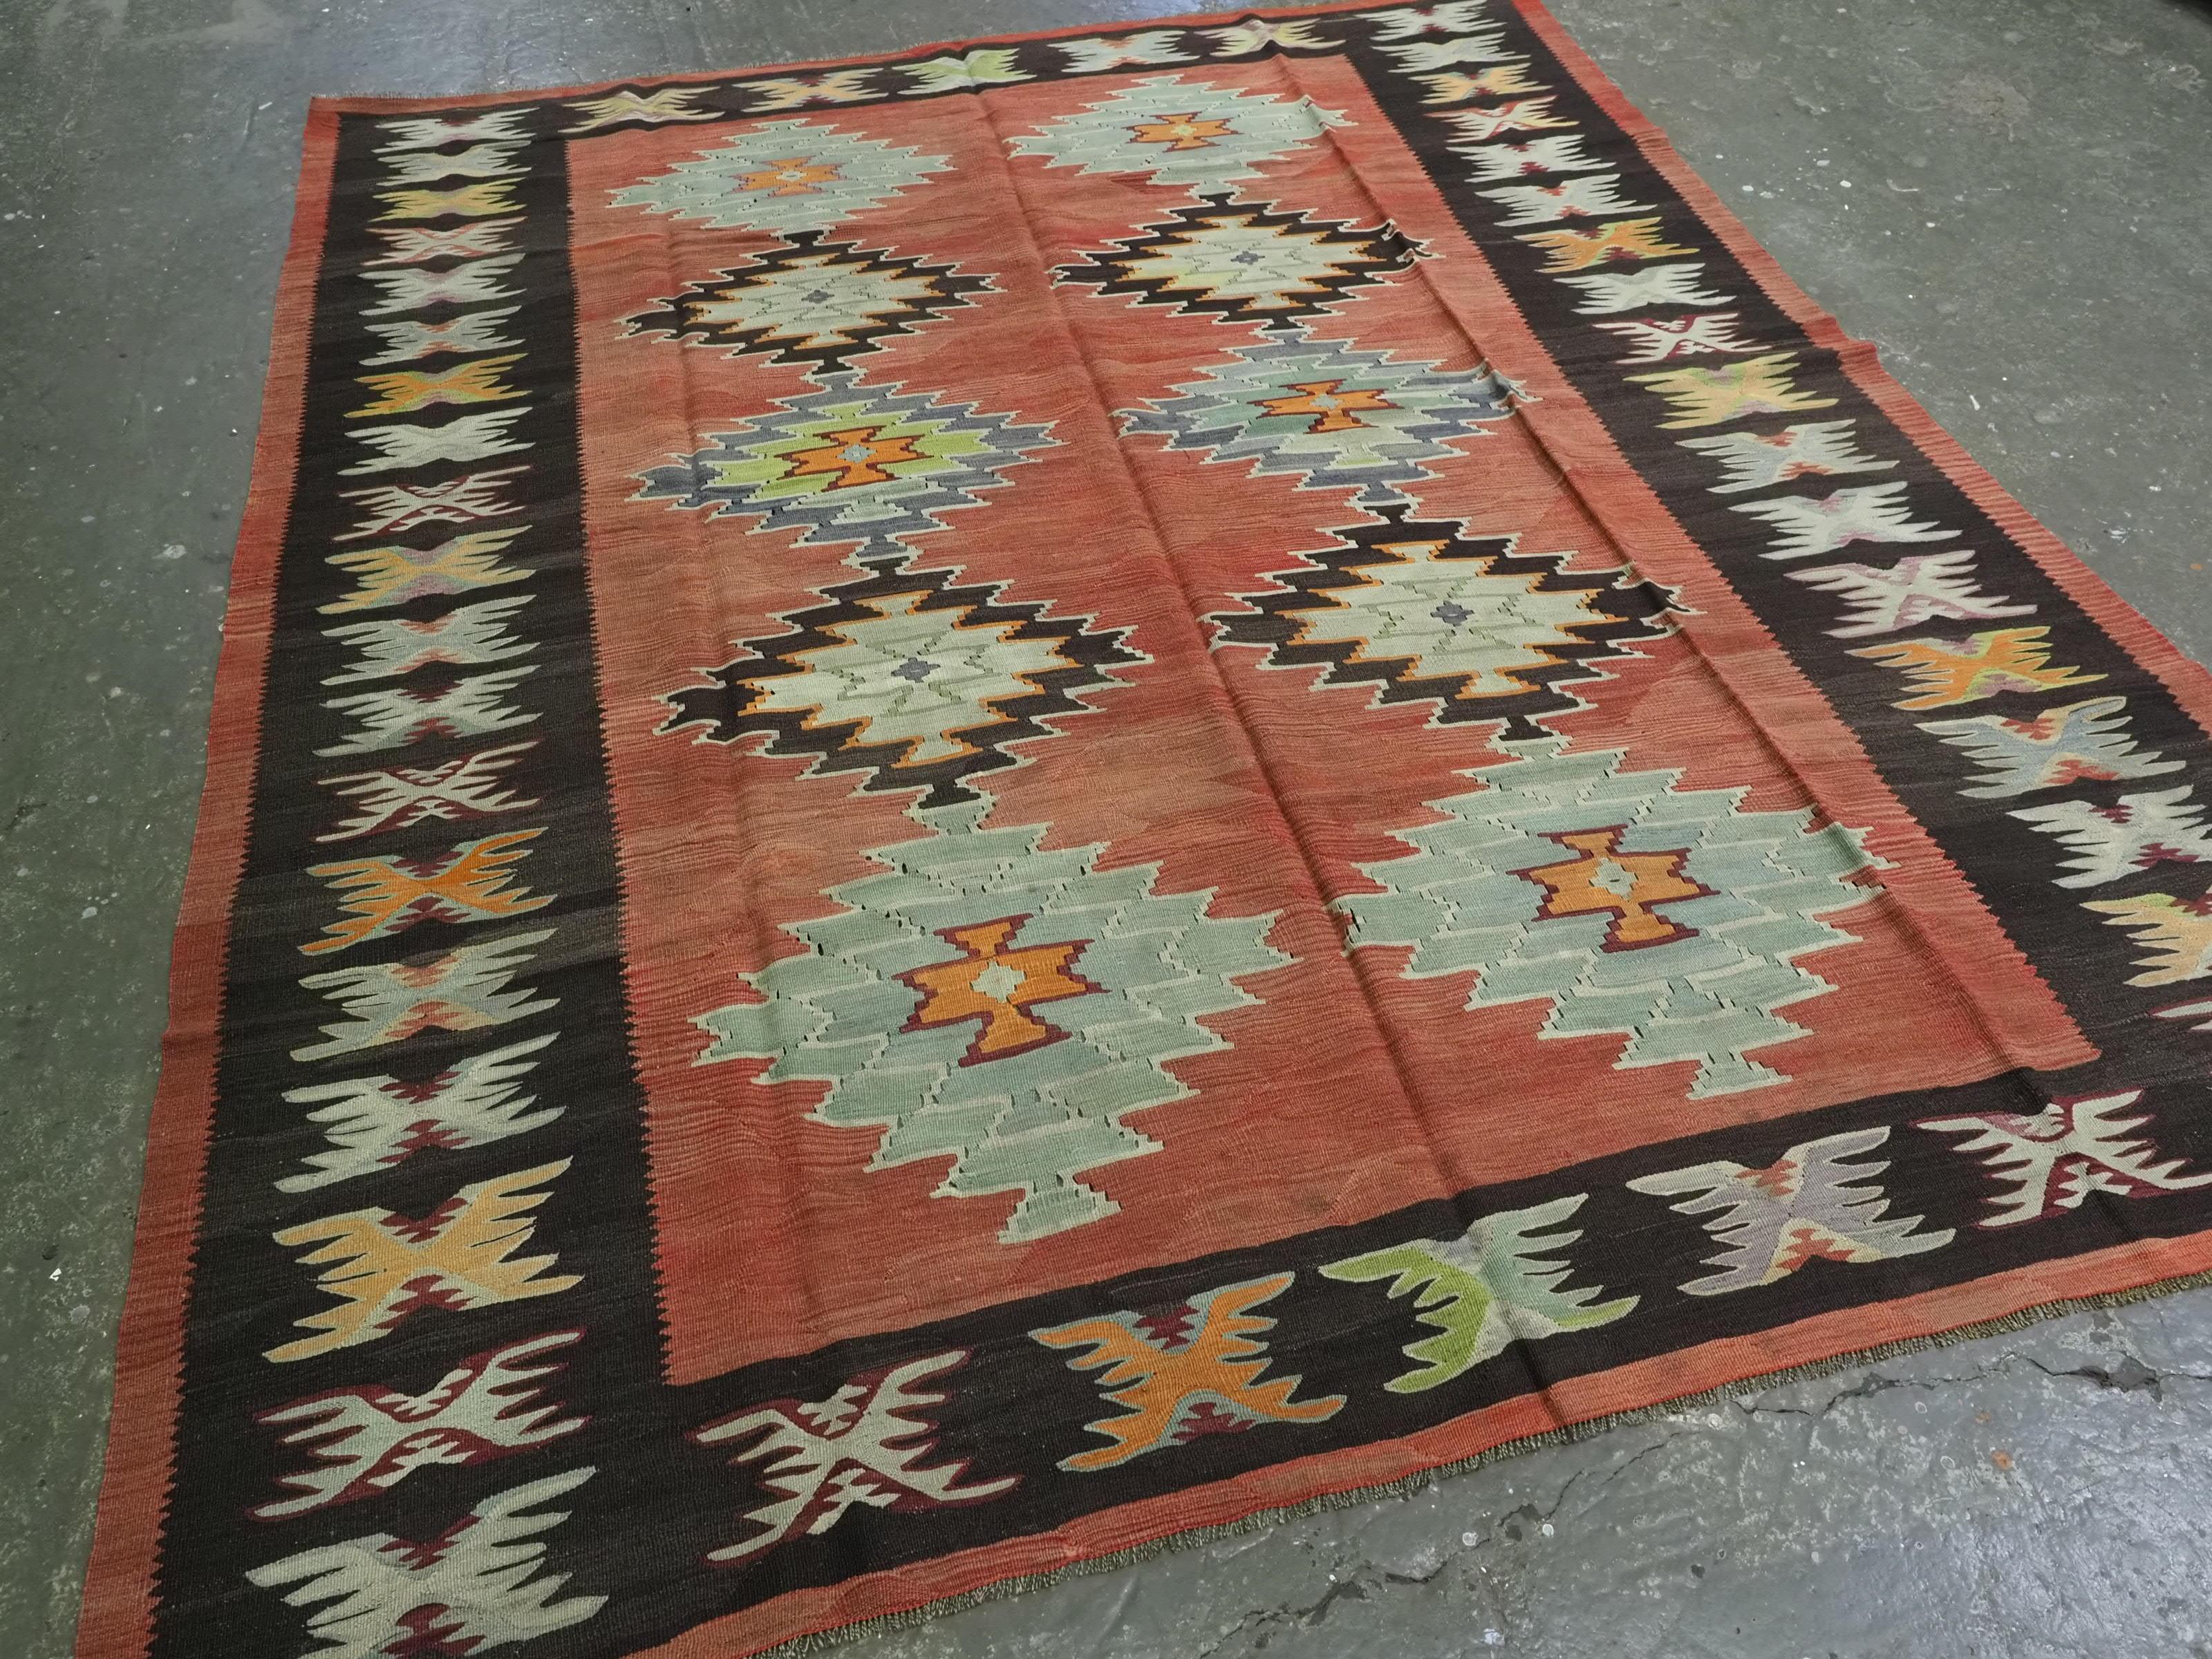 Size: 9ft 1in x 7ft 7in (278 x 231cm).

Antique Pirot / Sarkoy kilim of repeat diamond medallion design. A kilim of good room size with outstanding colour.

Circa 1920.

Pirot kilims are also known as Sarkoy or Sharkoy, they originate from the town